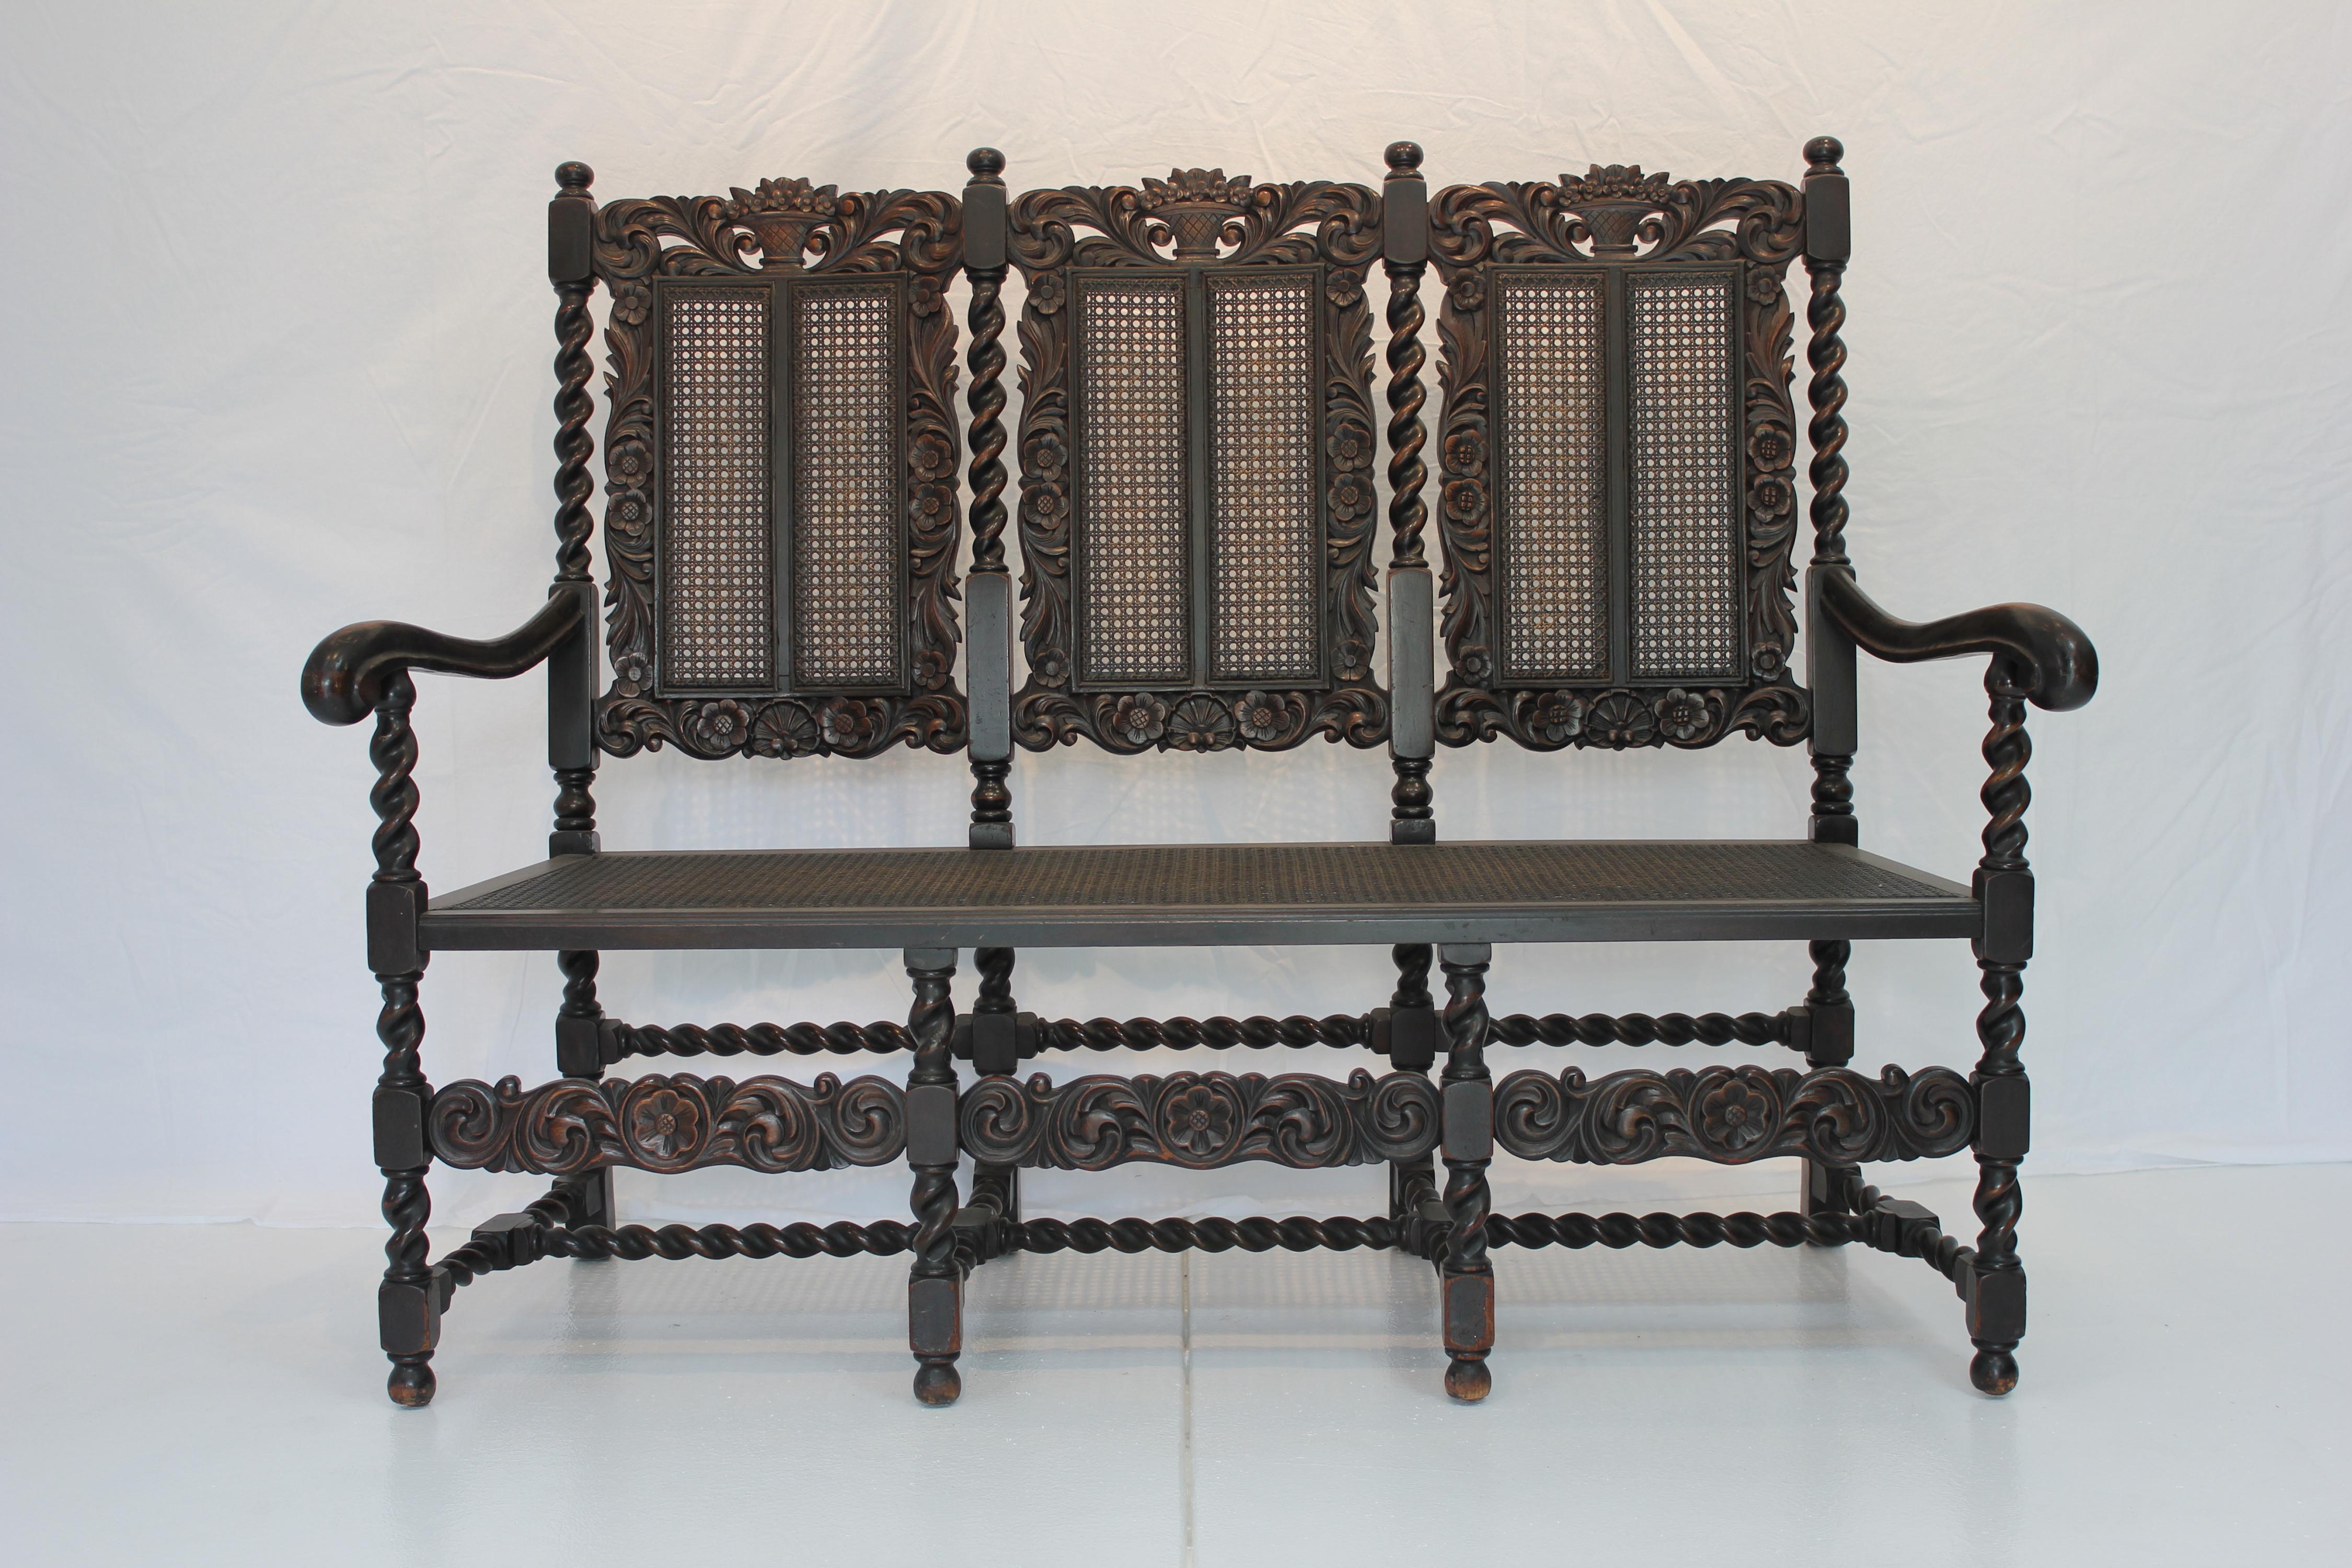 Hand-Crafted Antique English Jacobean Style Carved Oak Caned Seat and Back Settee Circa 1890 For Sale